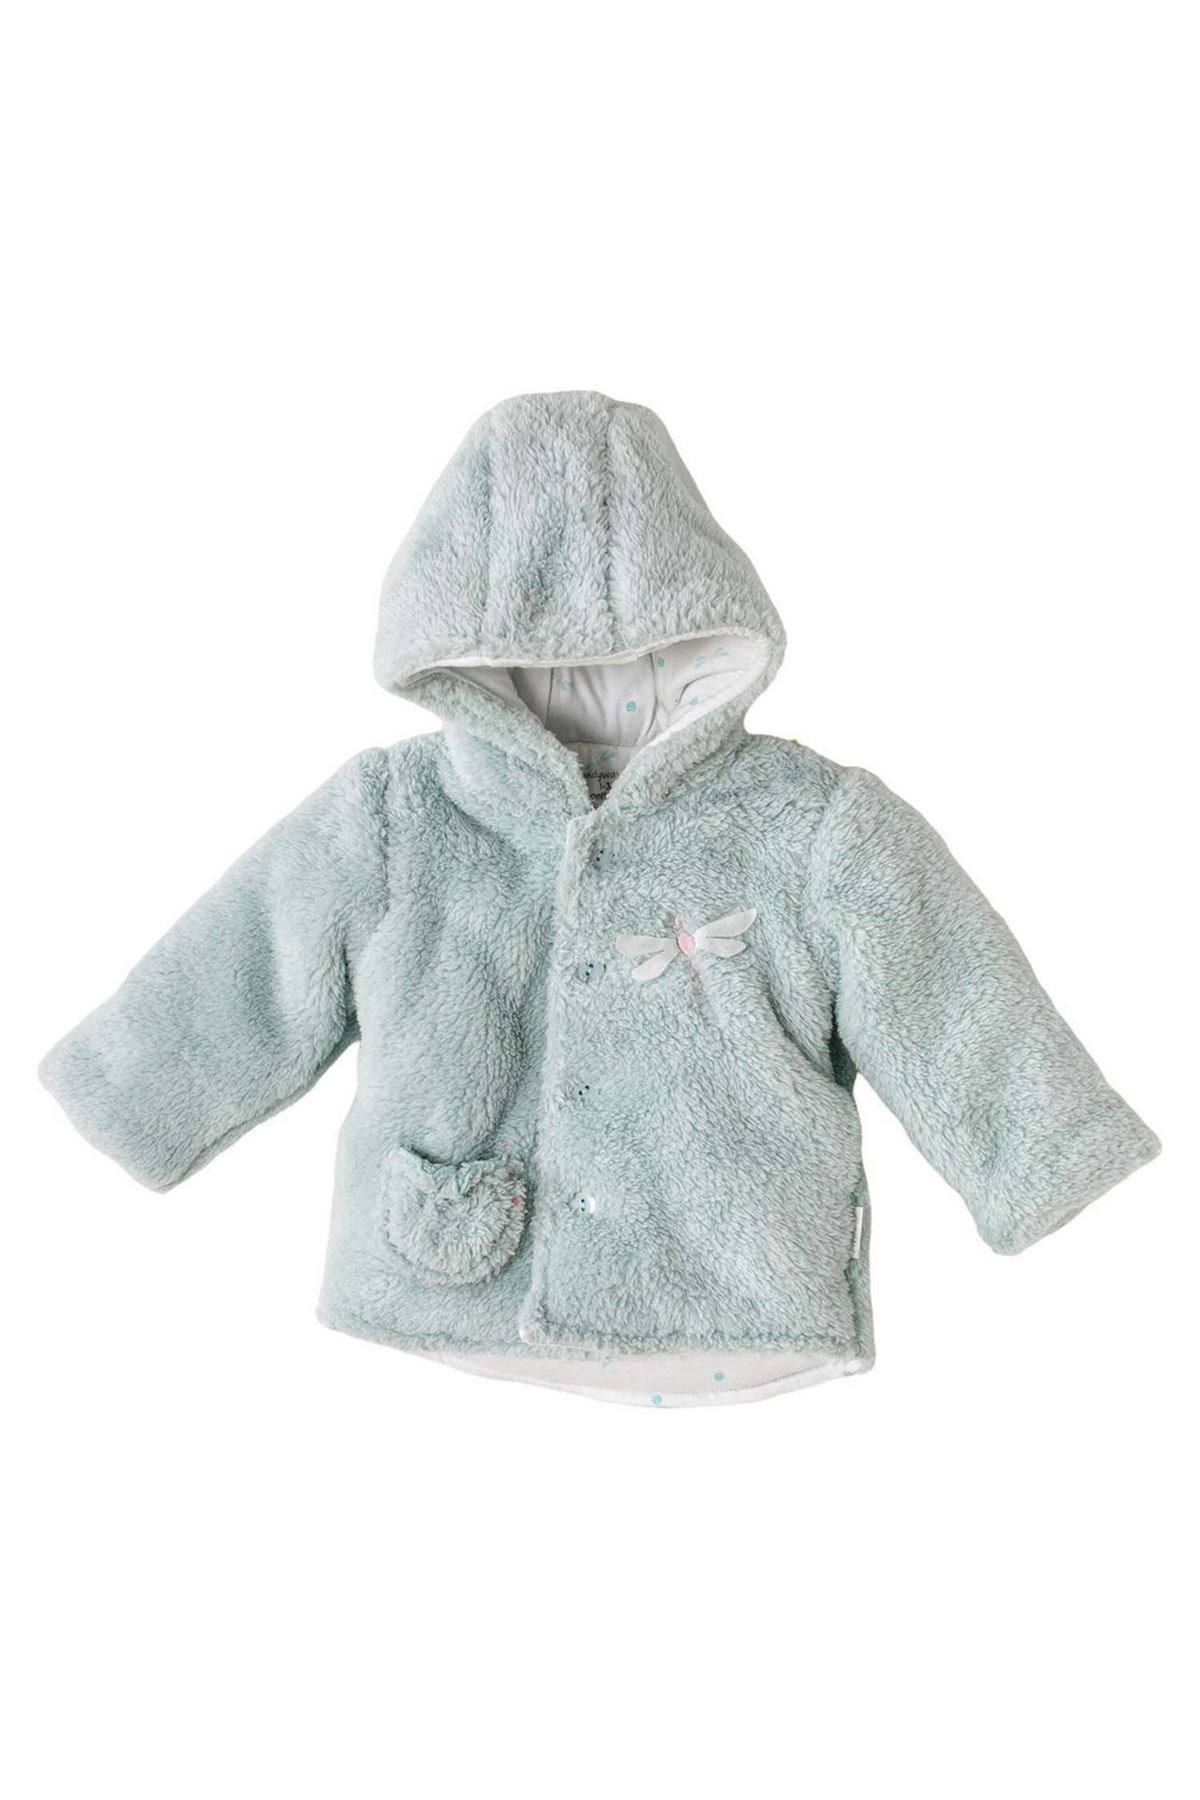 Andywawa AC23114 Dragonfly Welsoft Bebe Mont Mint